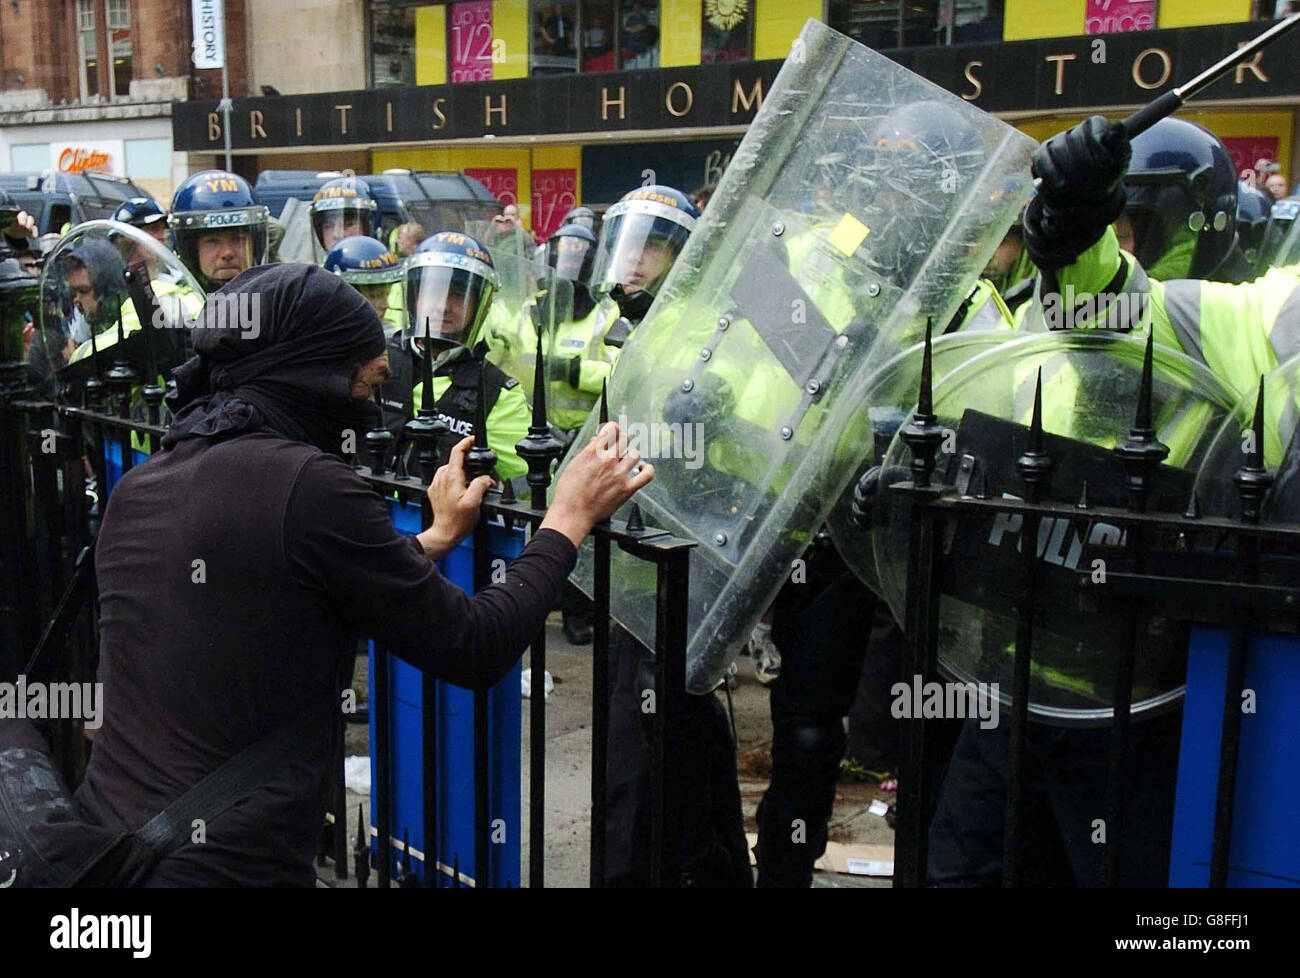 Riot police in Edinburgh charge a crowd of protestors with shields and batons, as anti-capitalist demonstrators took to the streets of Scotland's capital ahead of Wednesday's meeting of the G8 leaders in Gleneagles. Stock Photo